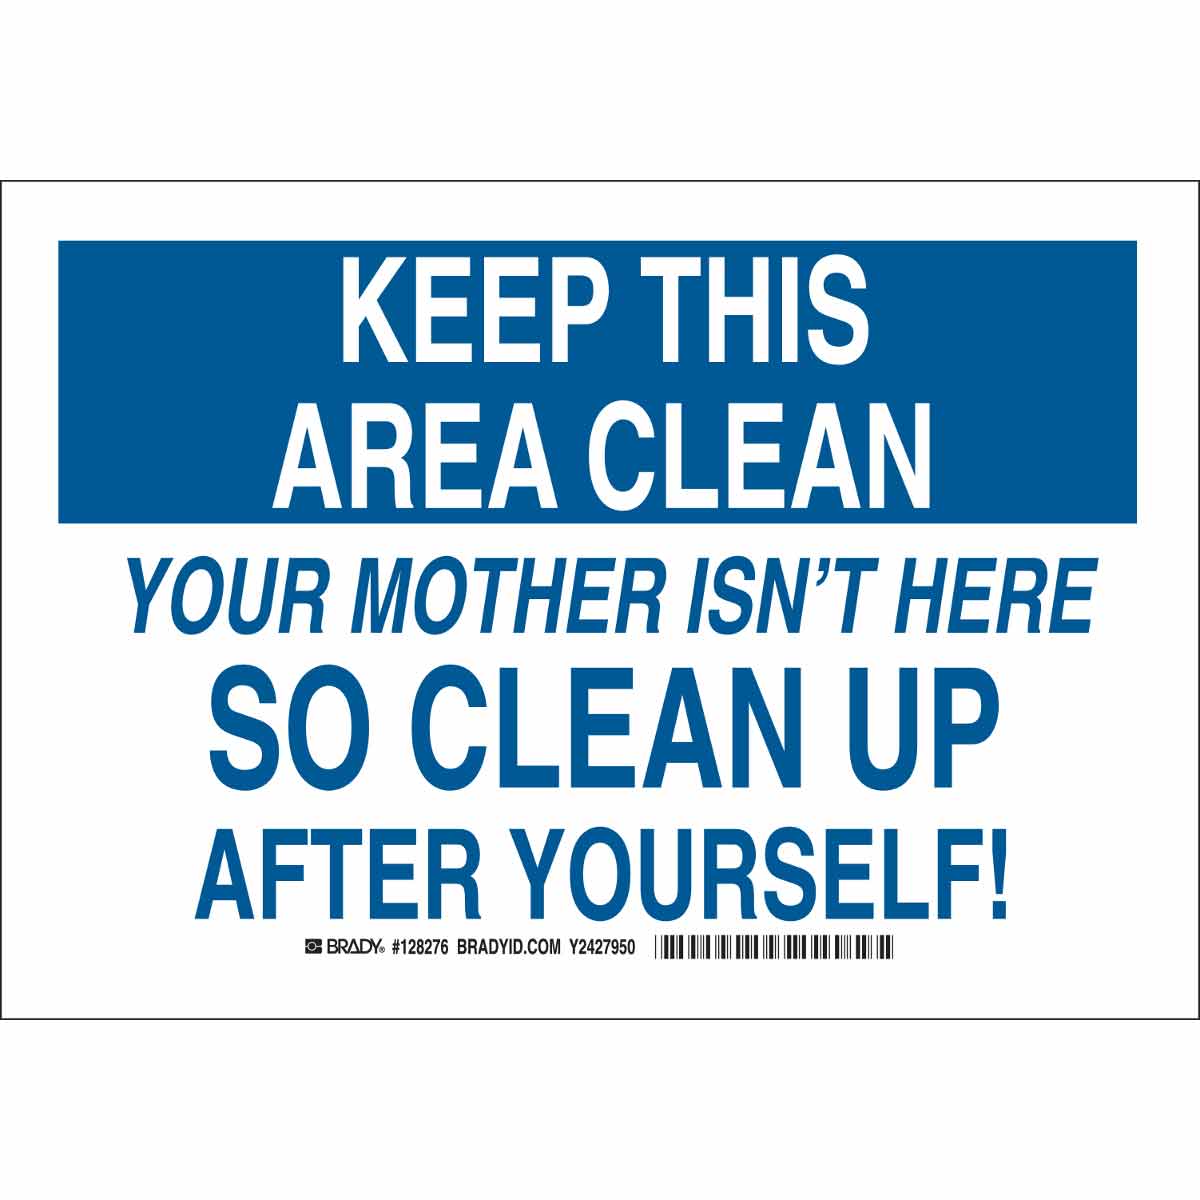 clean up after yourself sign